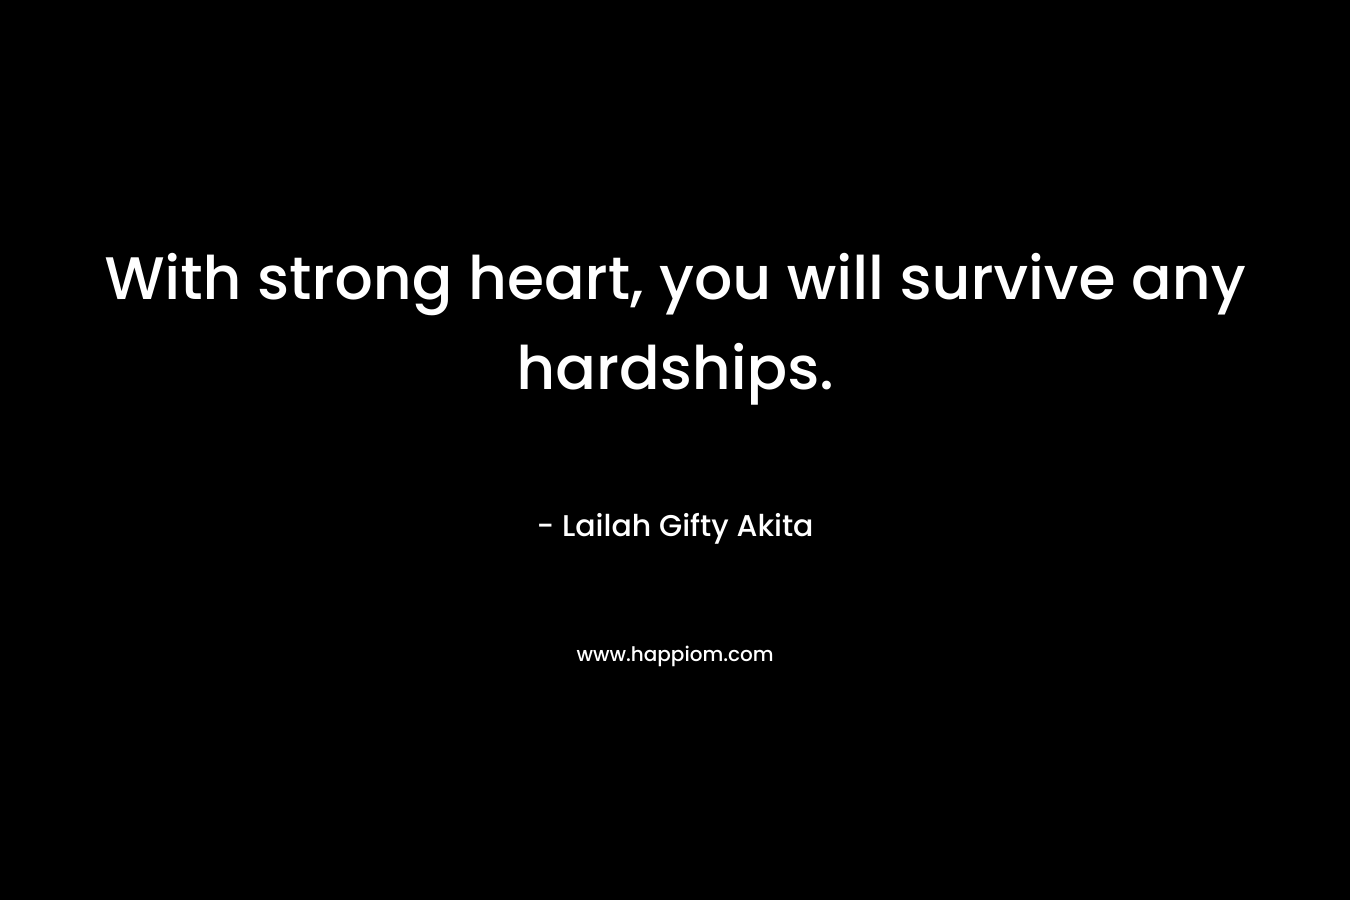 With strong heart, you will survive any hardships. – Lailah Gifty Akita